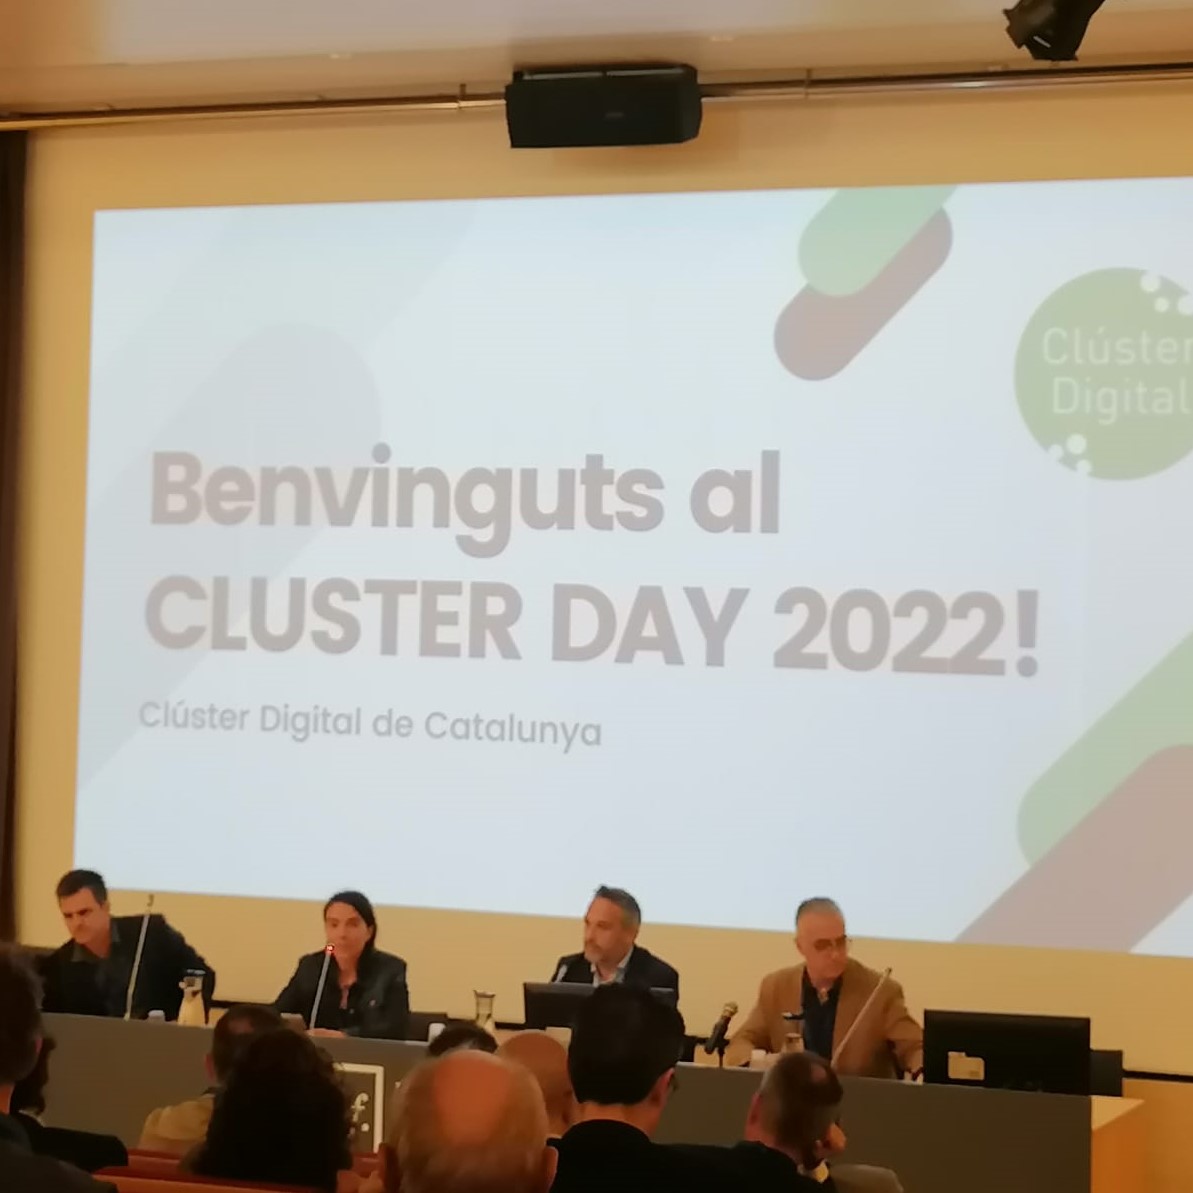 Cluster Day ponentes